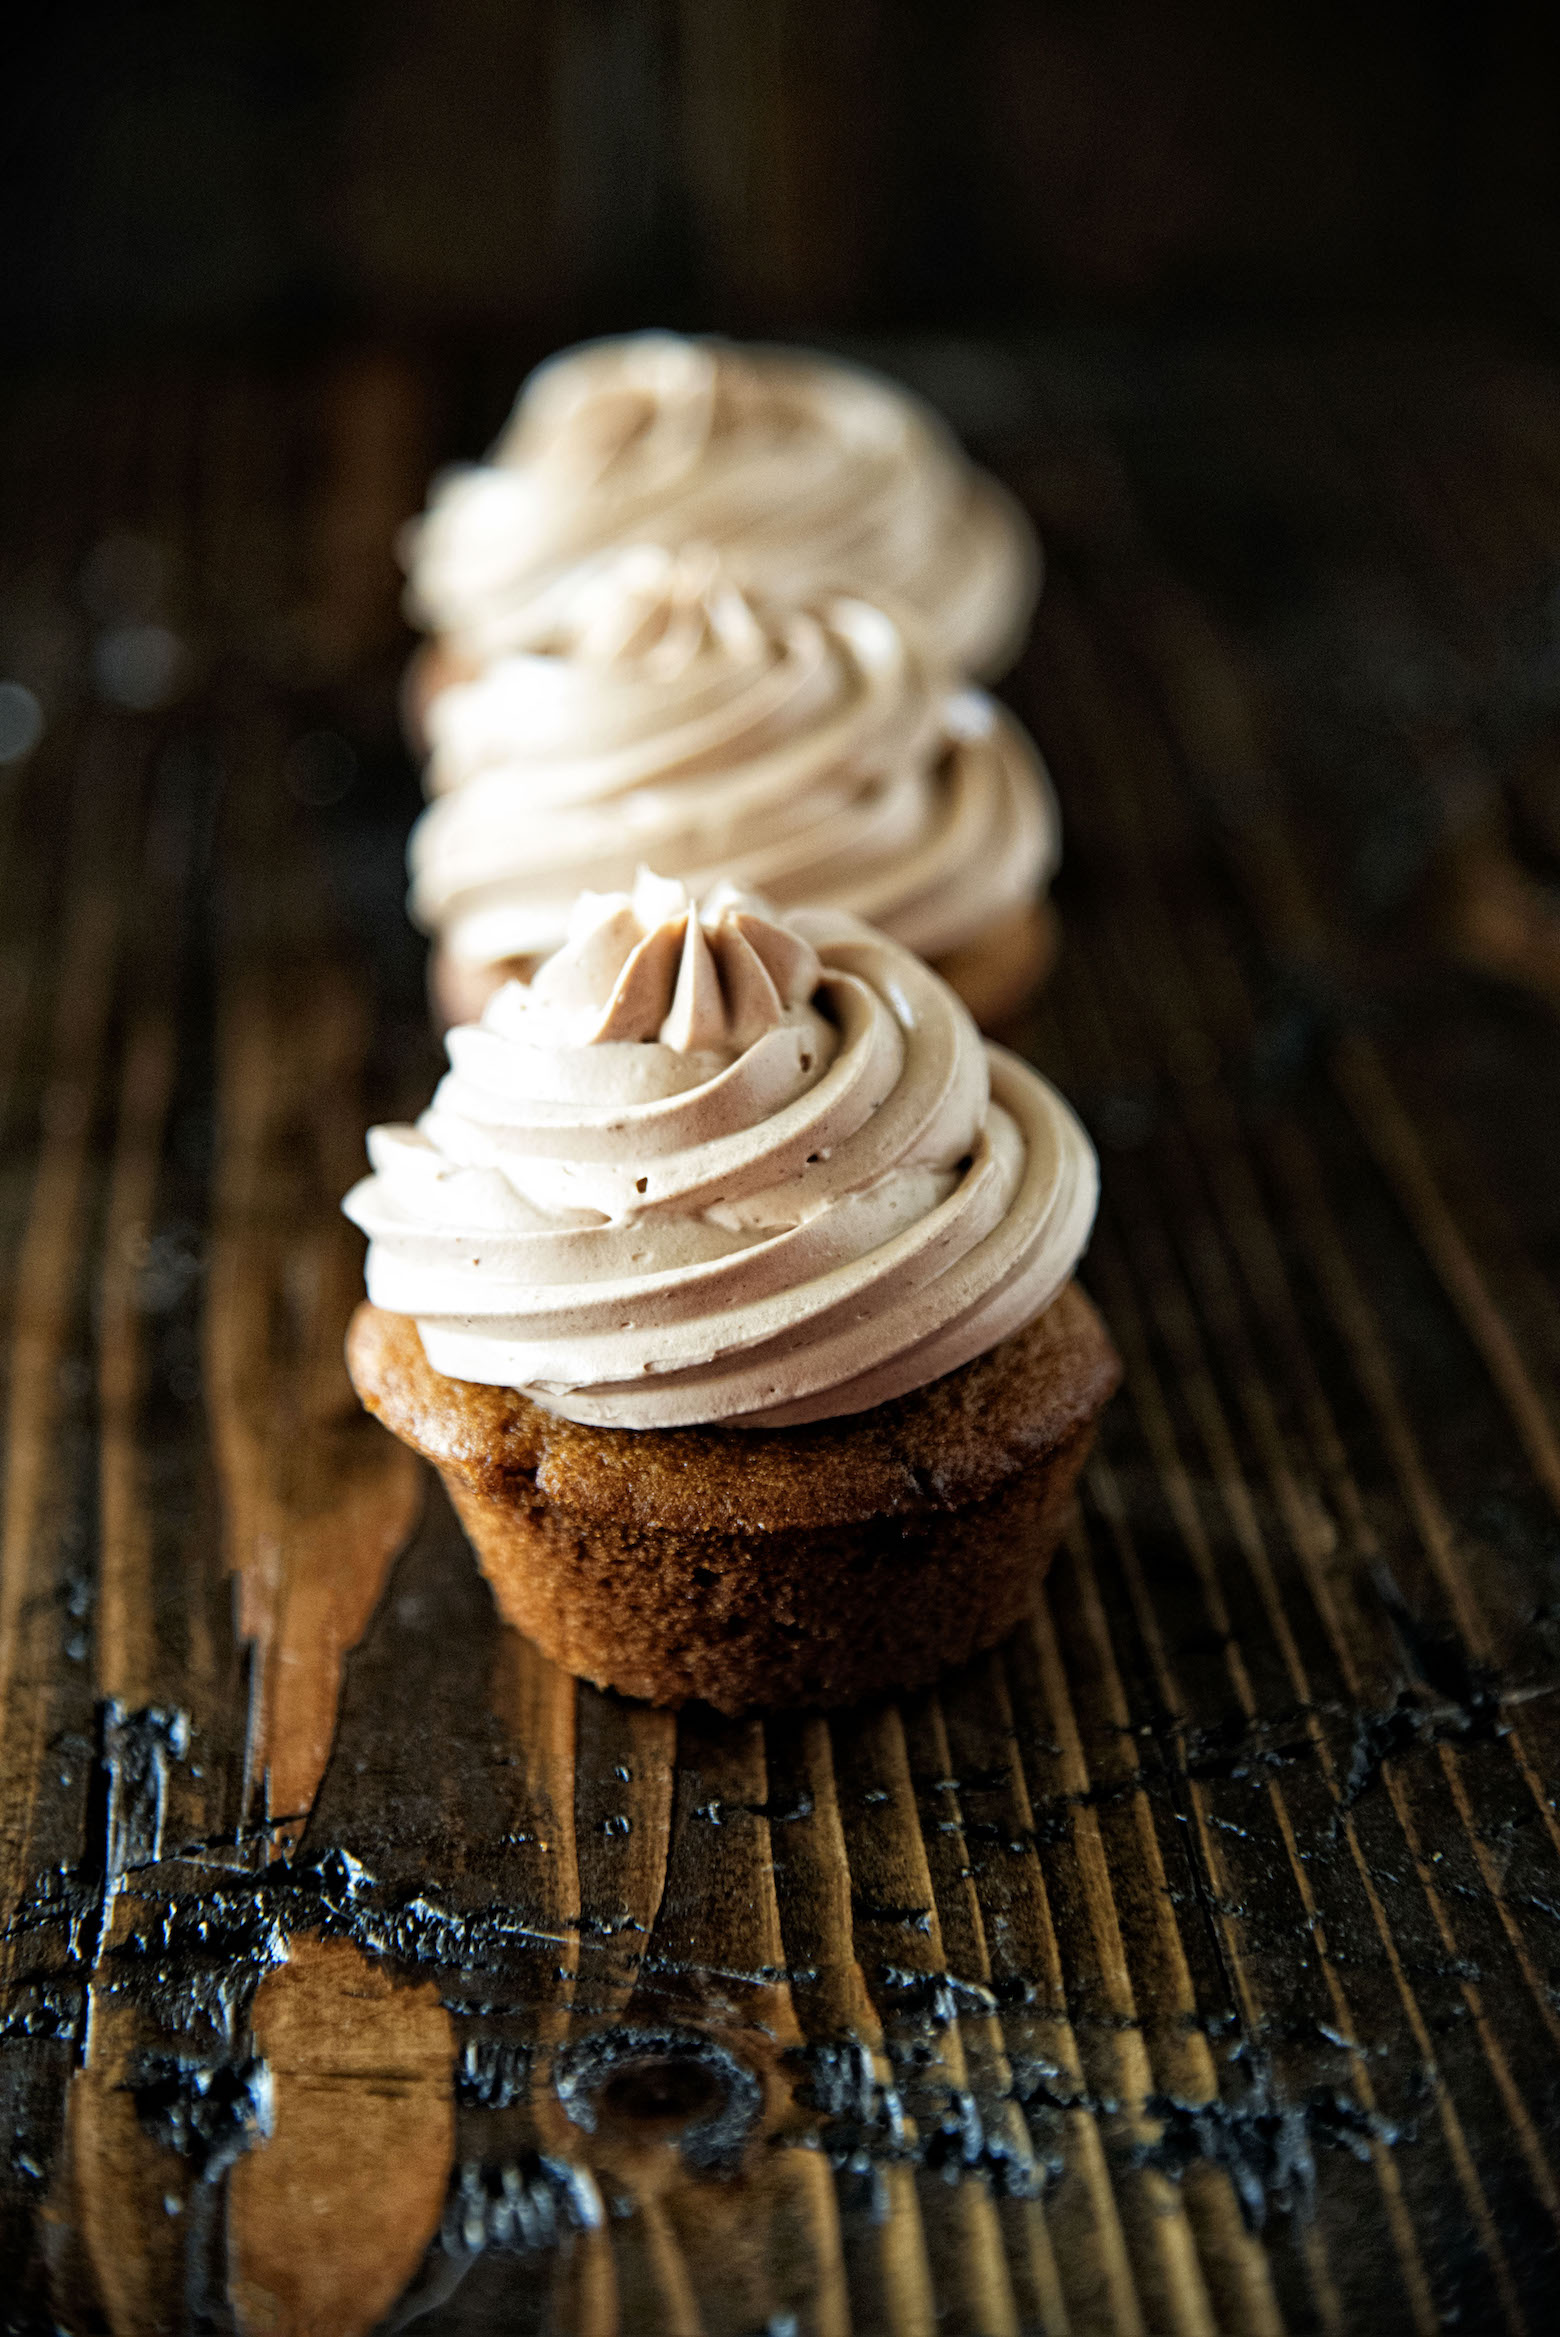 Row Chocolate Cinnamon Frosted Pumpkin Cupcakes going front to back.